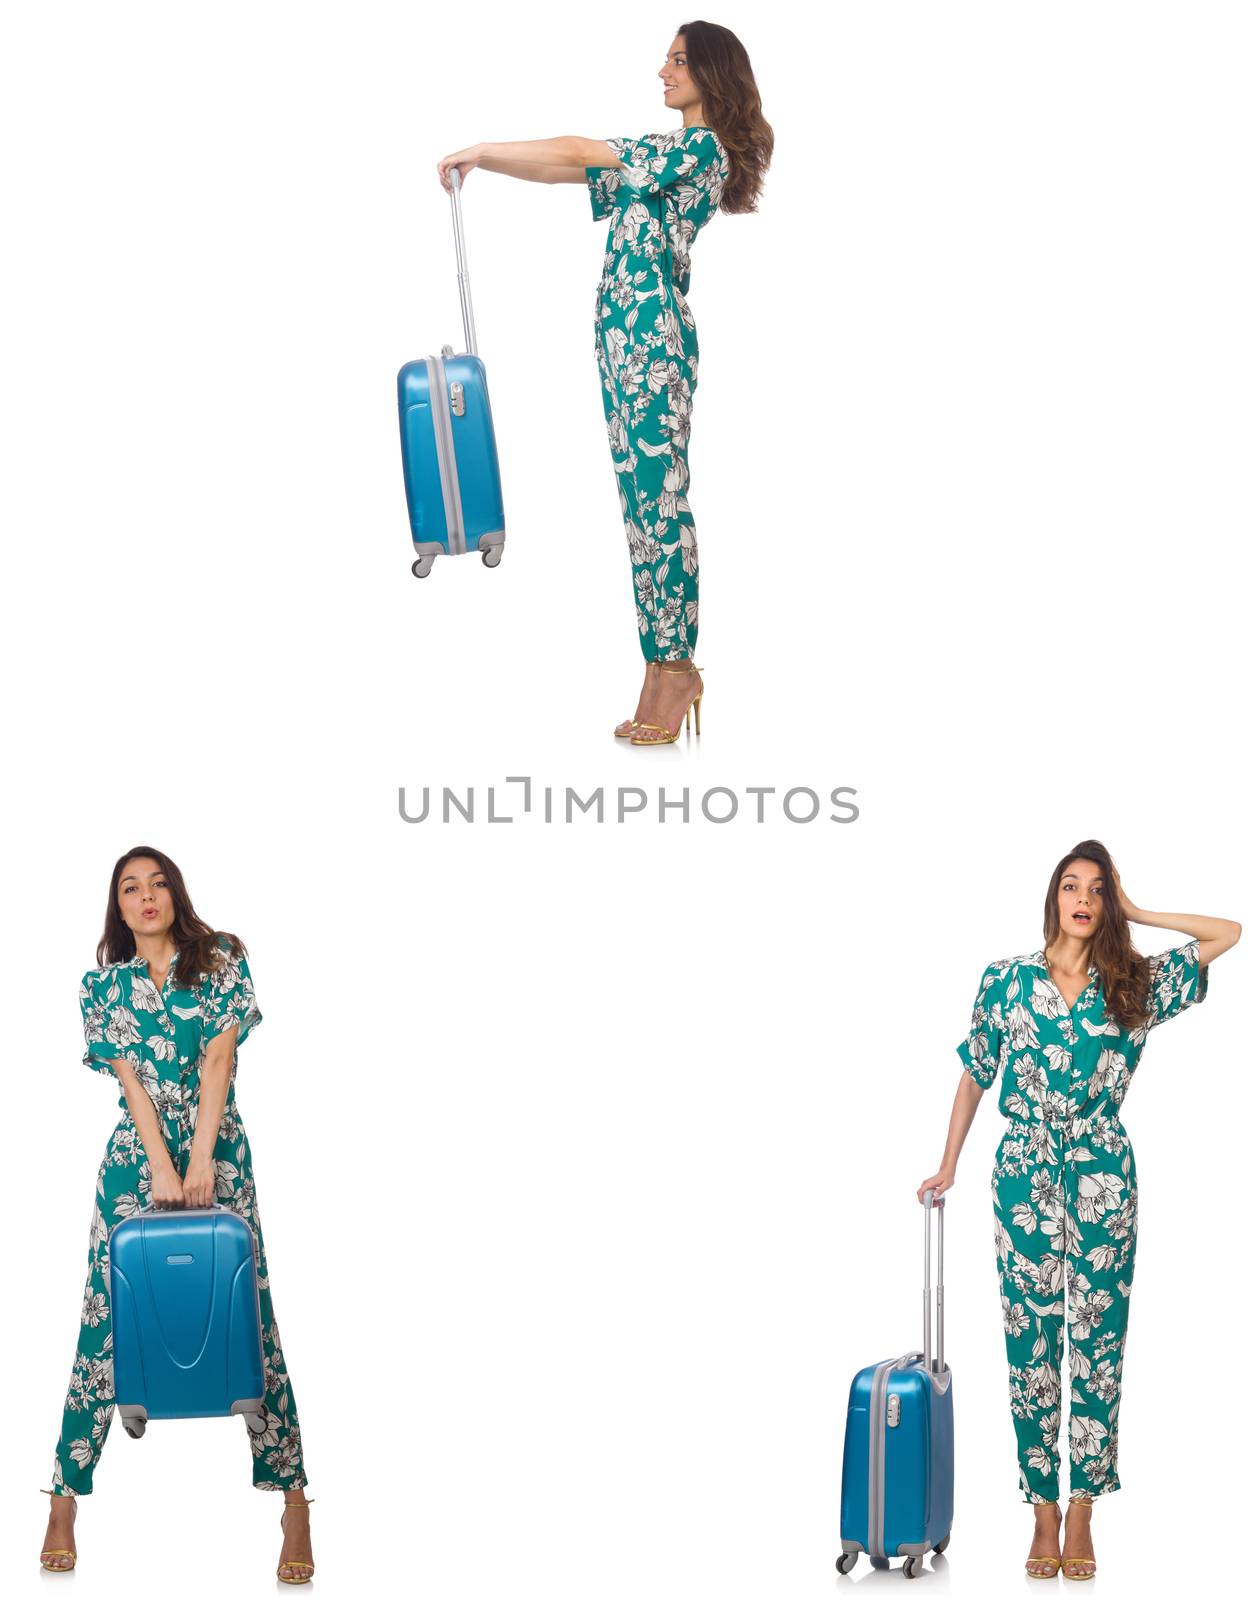 Woman with suitacases preparing for summer vacation by Elnur